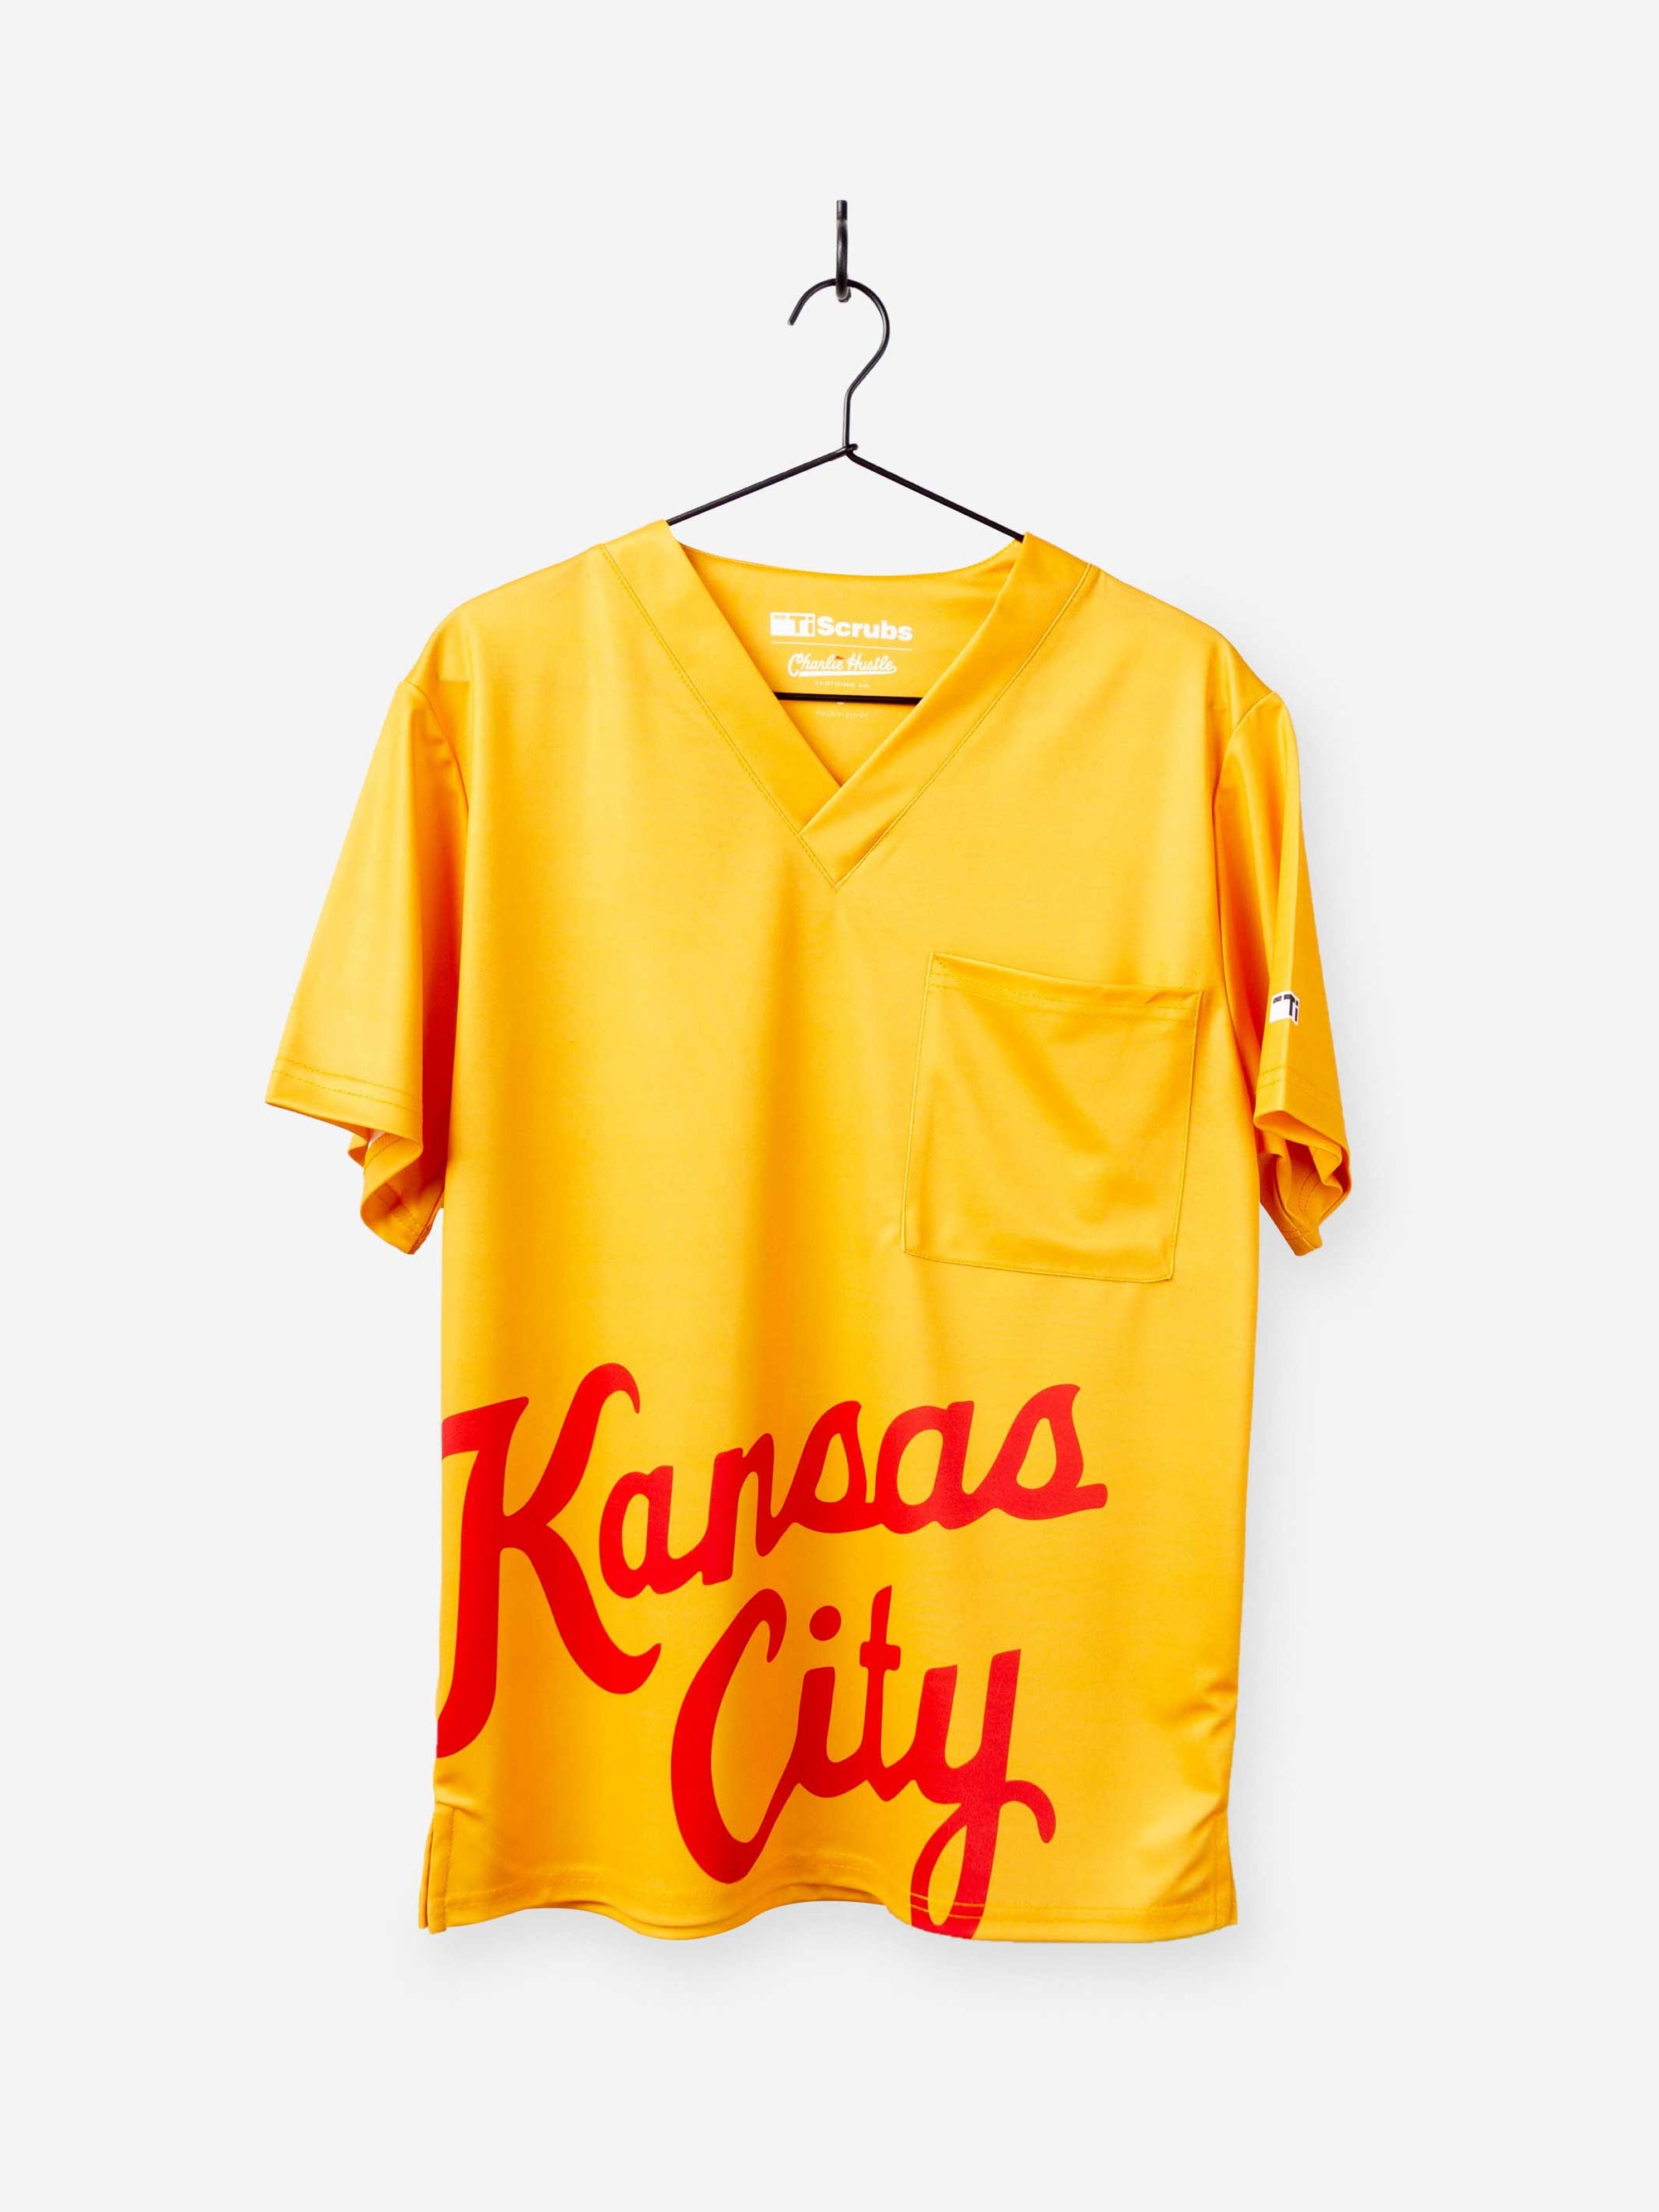 Men&#39;s Charlie Hustle Print Scrub Top with Kansas City Script in Gold and Red with Chest Pocket